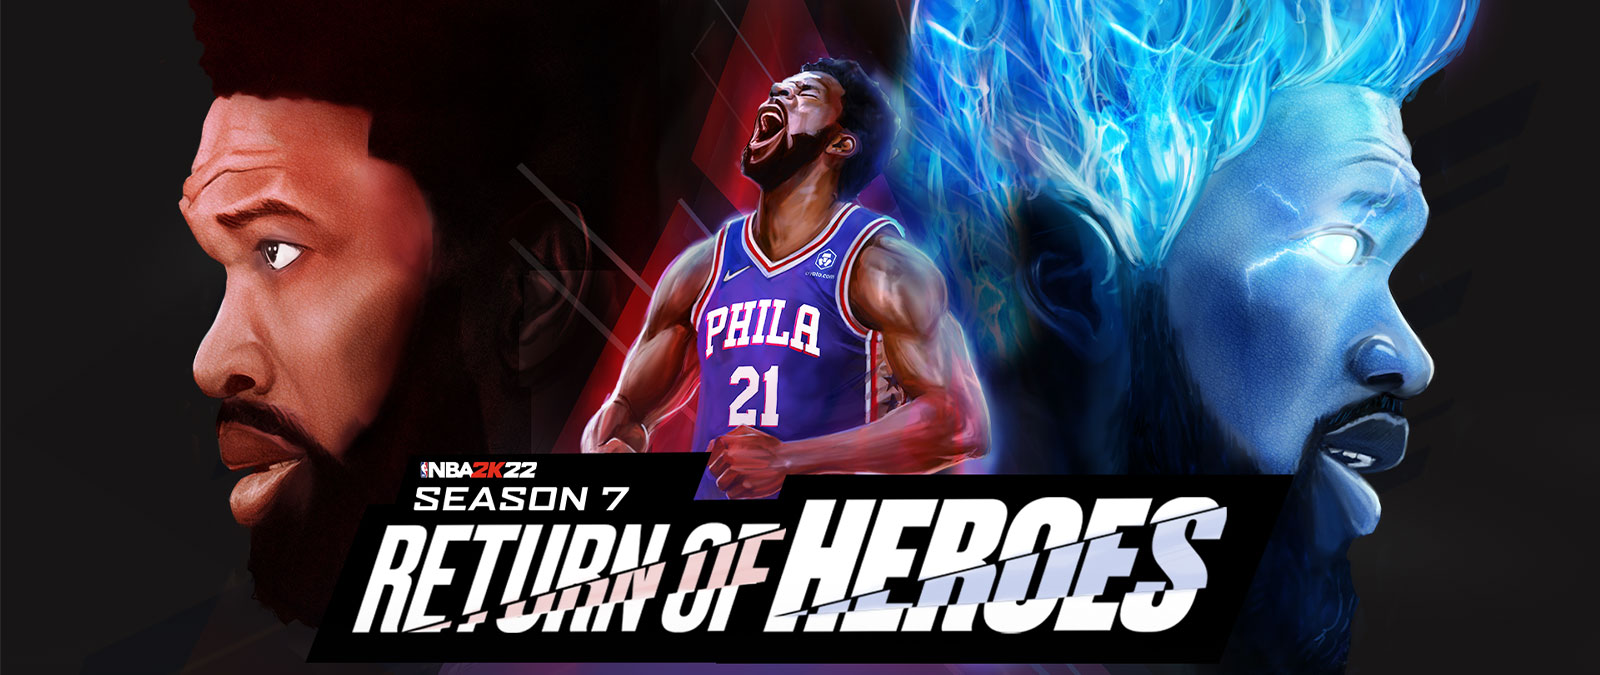 NBA 2K22, Season 7, Return of Heroes, a player for Philadelphia yells into the sky and powers up with blue flames.